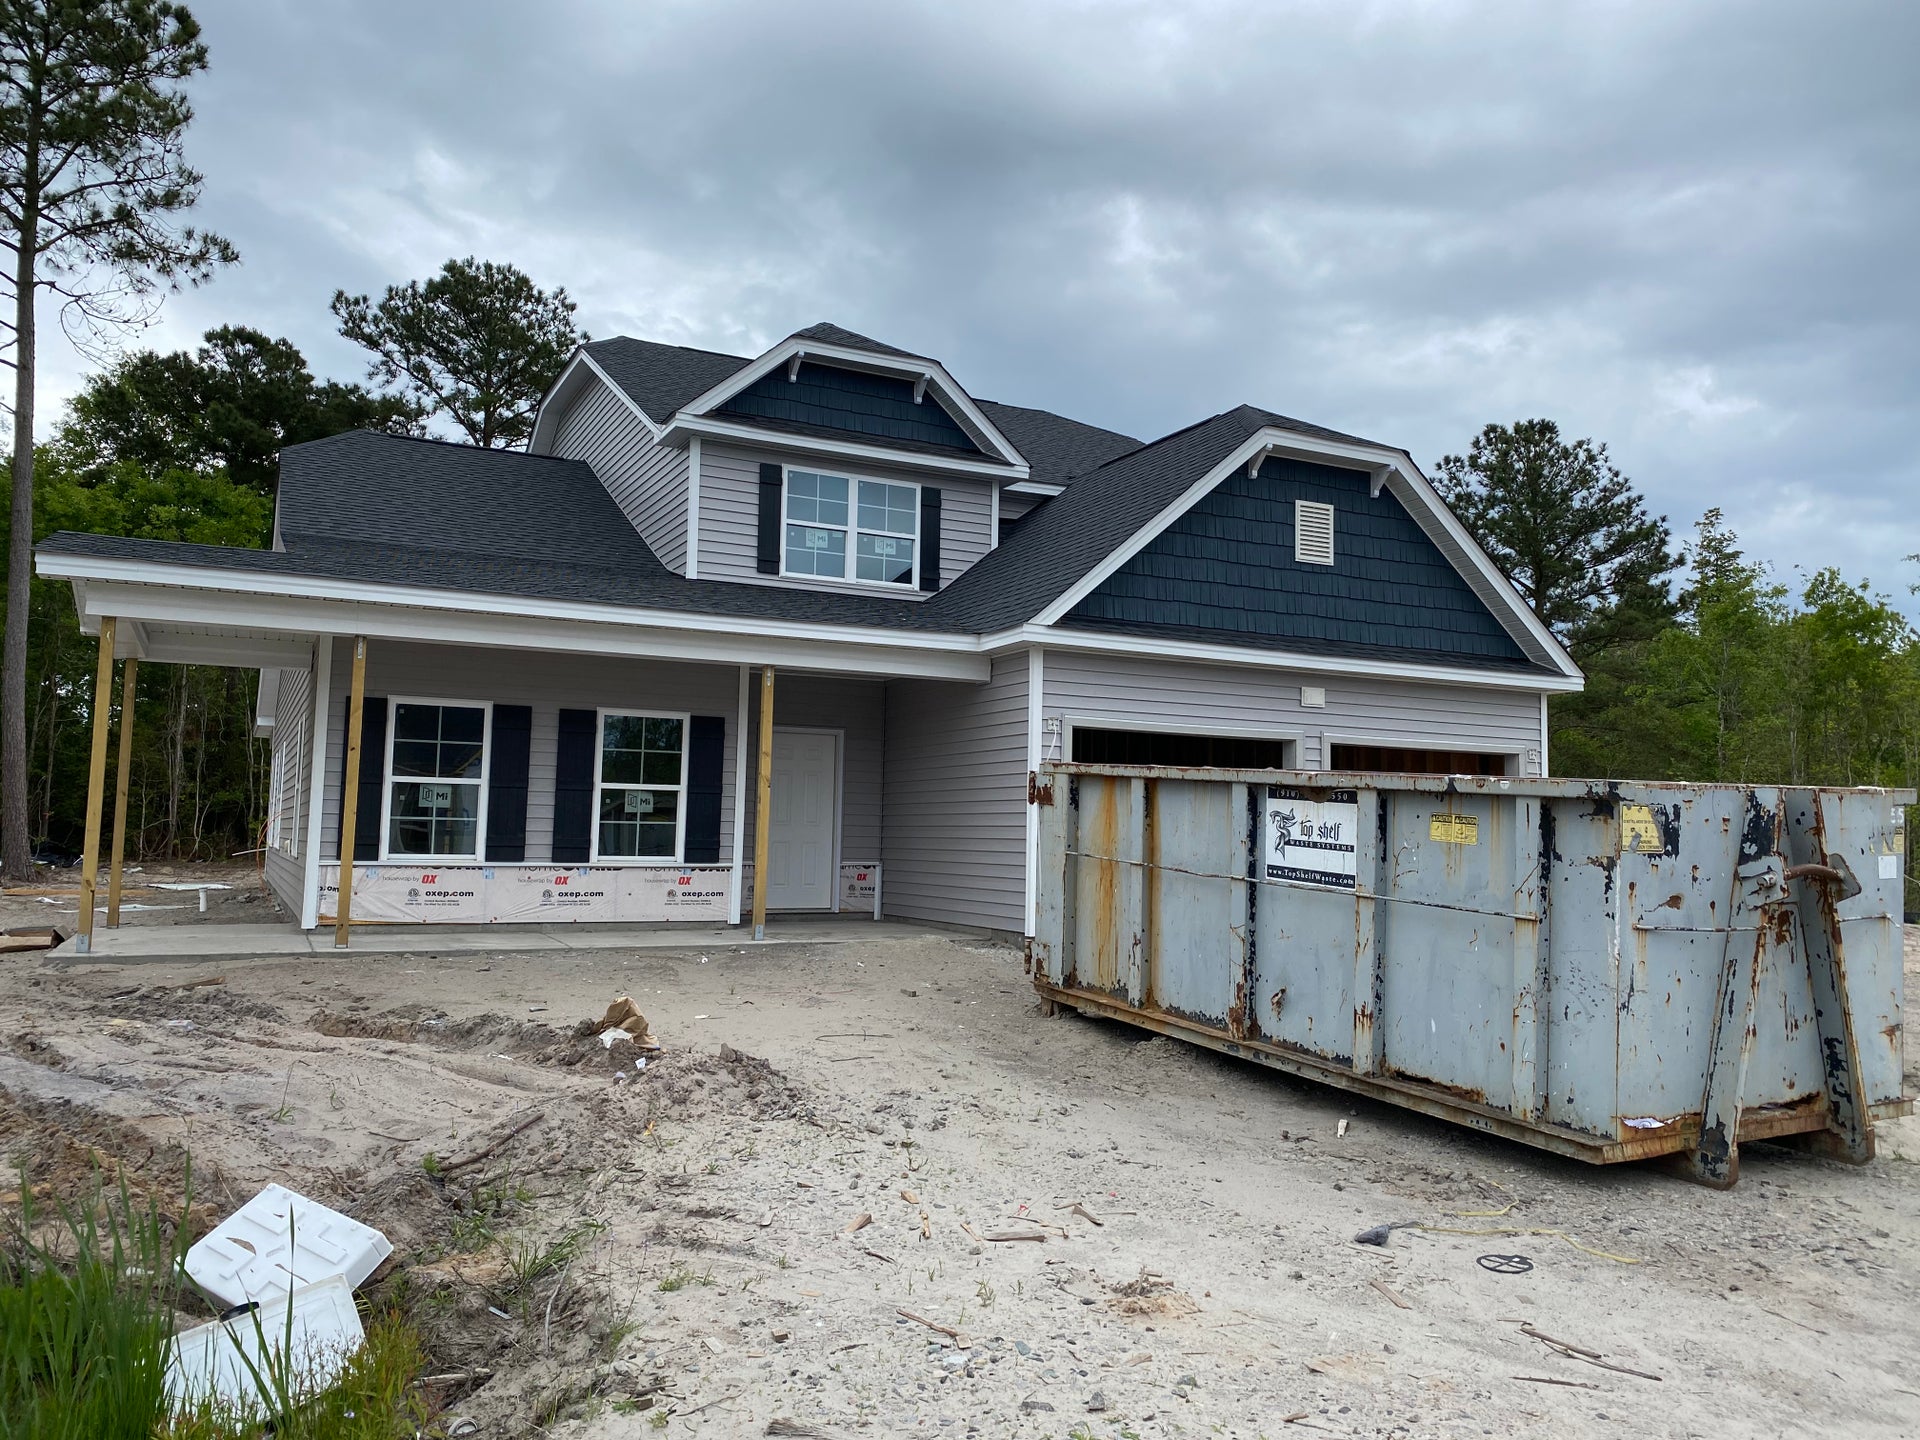 4br New Home in Sneads Ferry, NC